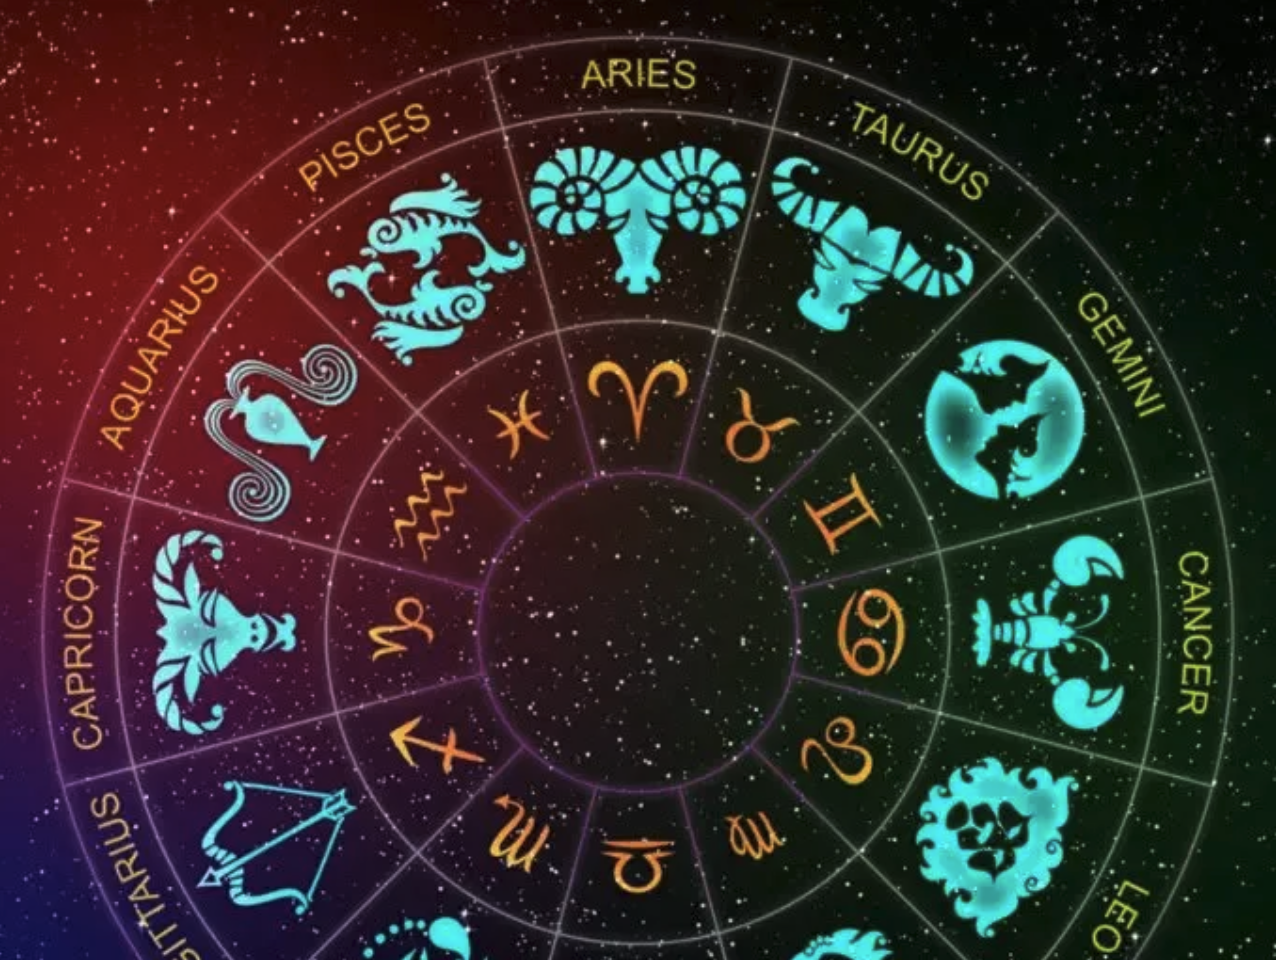 The 3 most Powerful and Charismatic zodiac signs, according to astrology